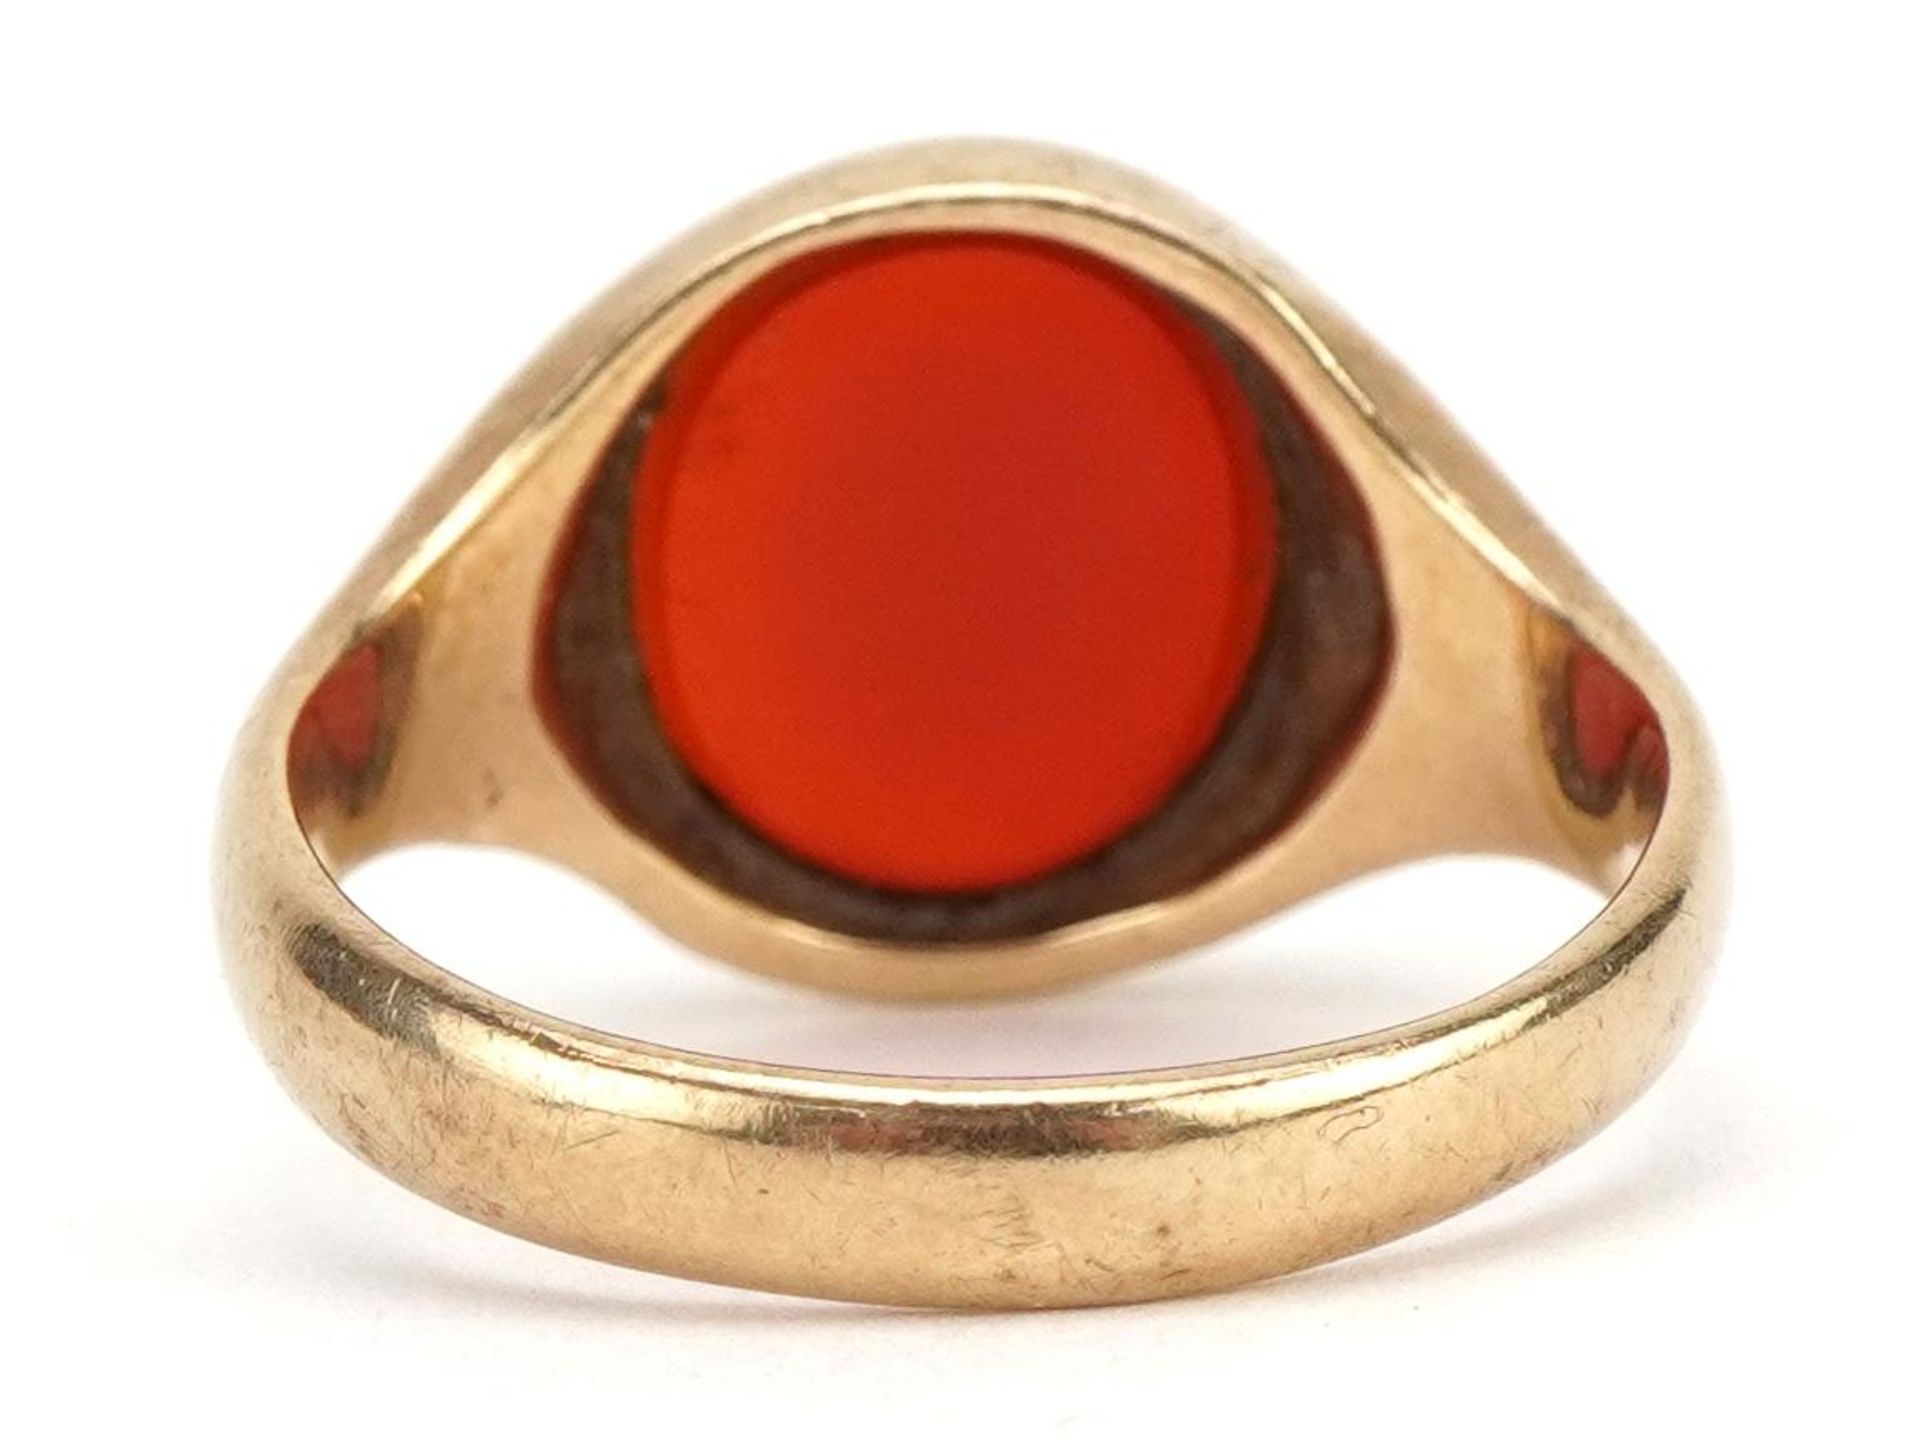 9ct gold carnelian signet ring, the carnelian approximately 10.4mm x 9.1mm, size Q, 5.2g - Image 2 of 3